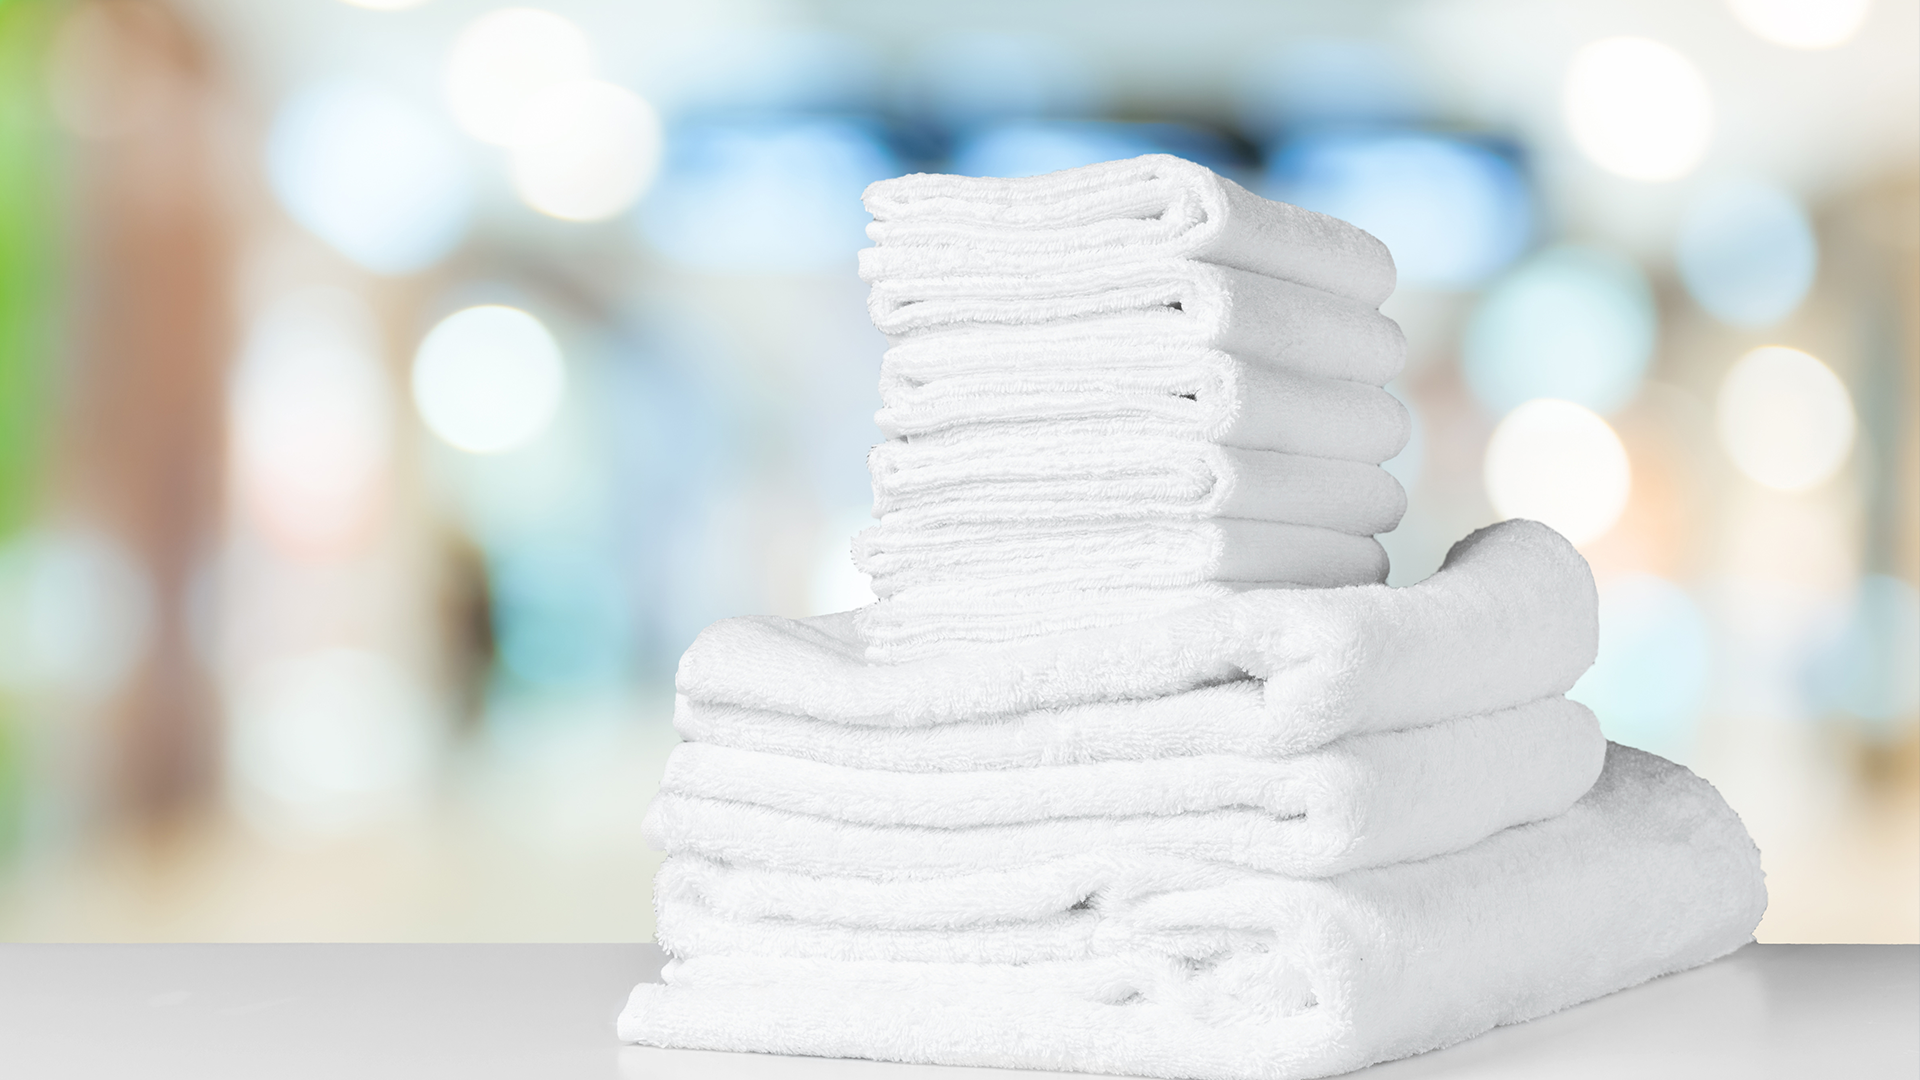 Double Washing Linens Effectively Cleans Clothing Contaminated With Cyclophosphamide